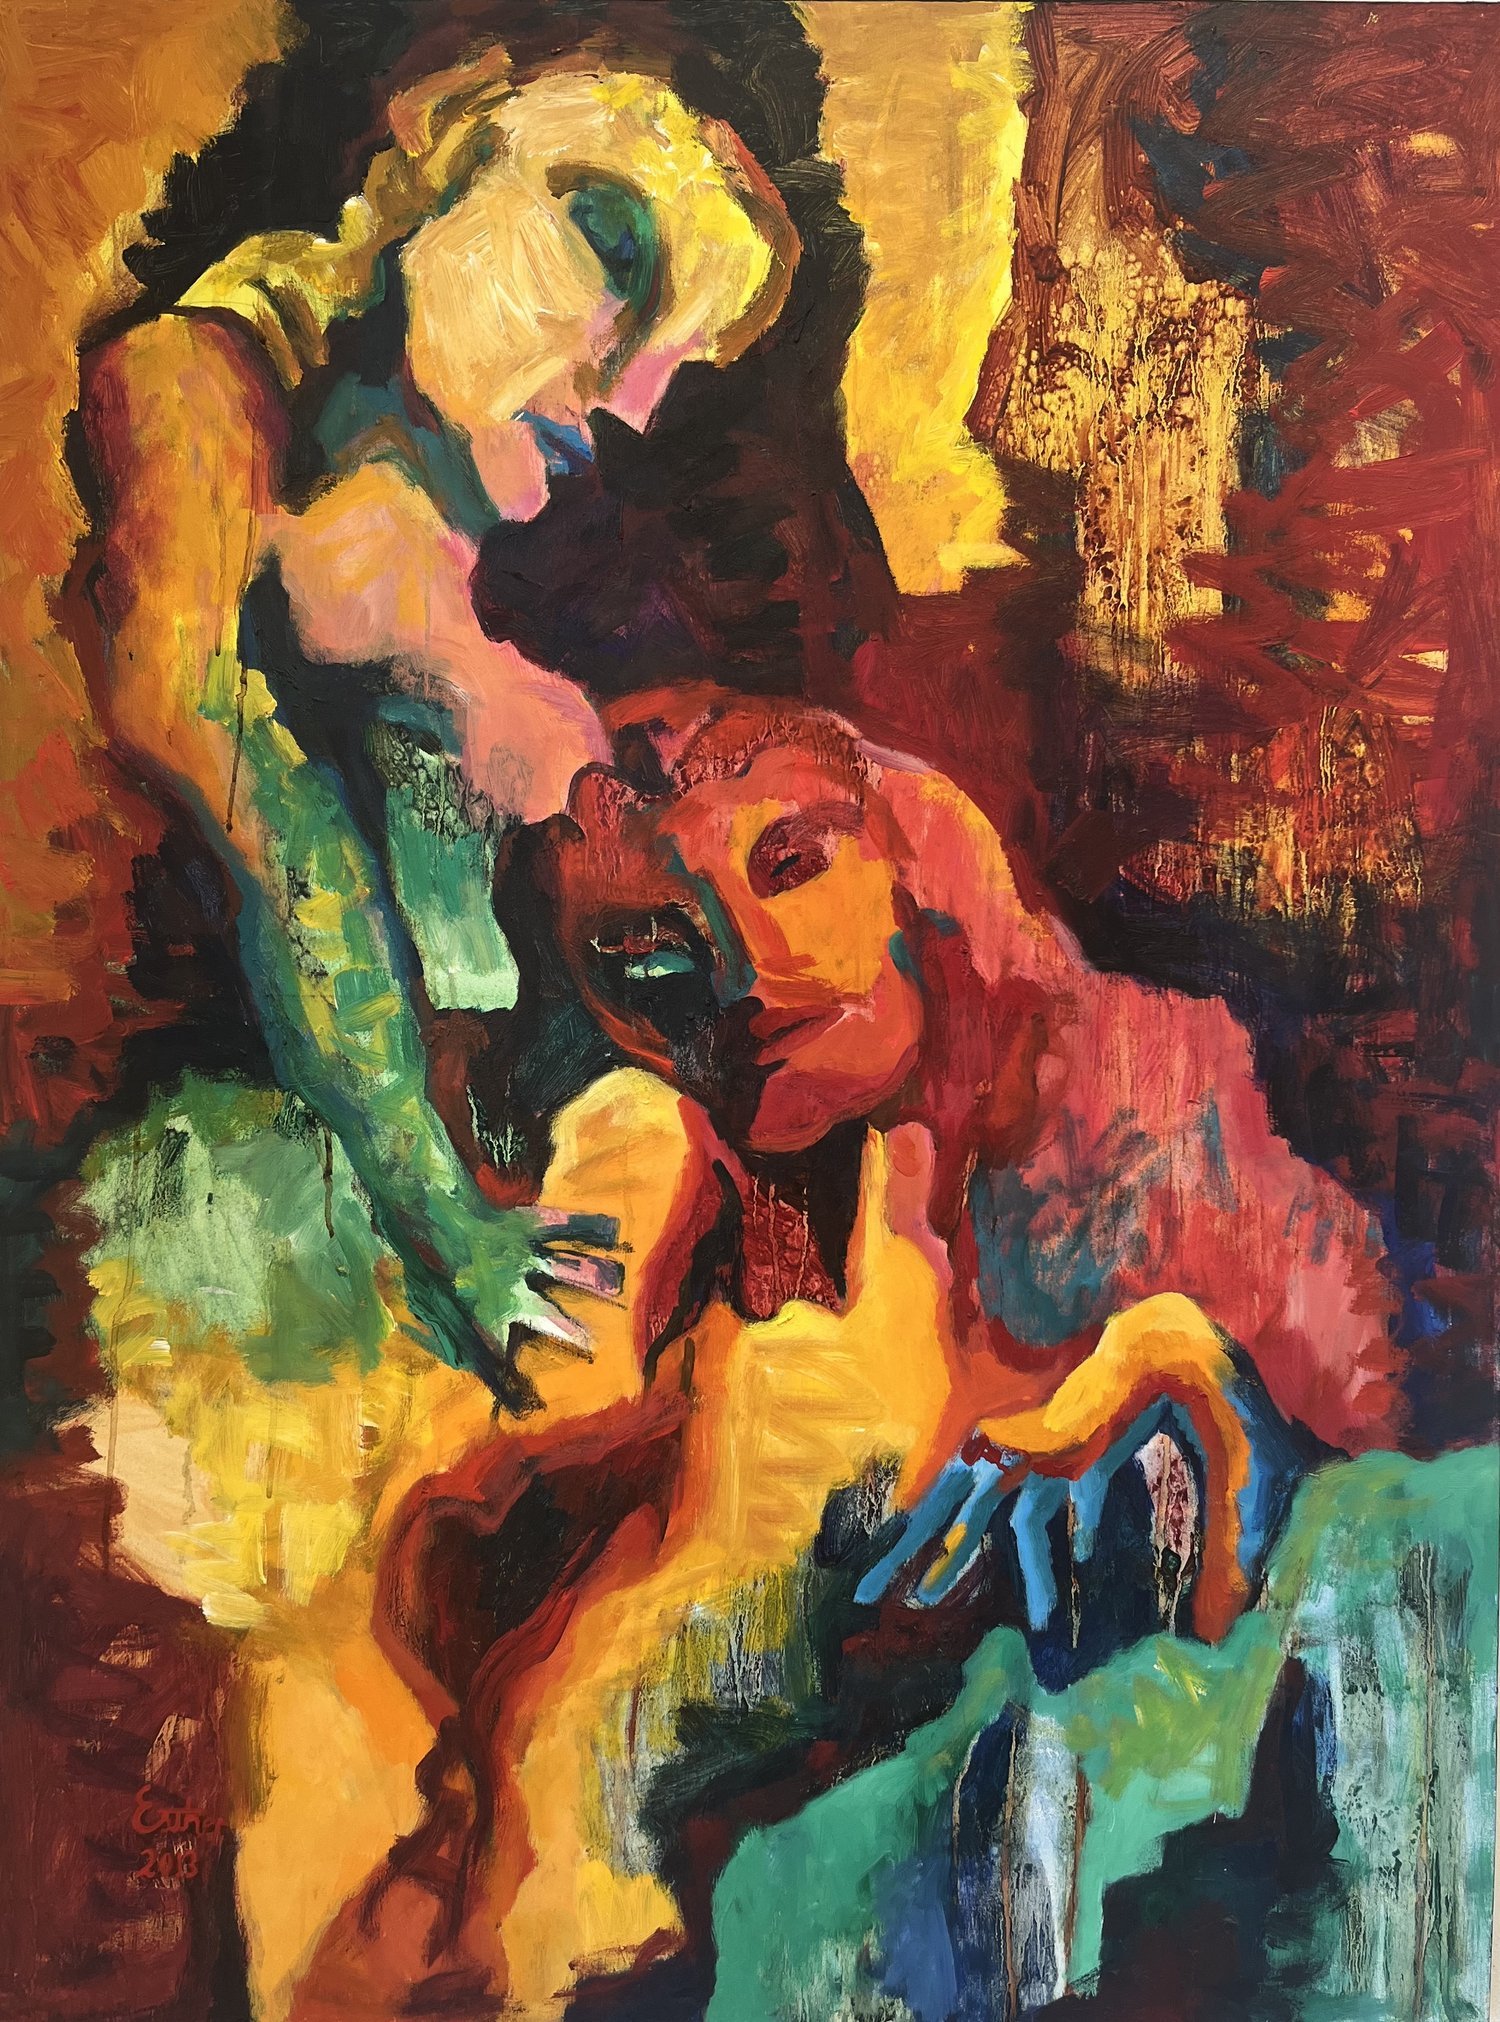   The Notice by Setareh Pourrajabi   39”x 51”, Oil and acrylic on canvas,   I came from a country where commonly women are second level of society compared with men. This causes us anger and fear illustrated in my artworks. The figures are nude but c